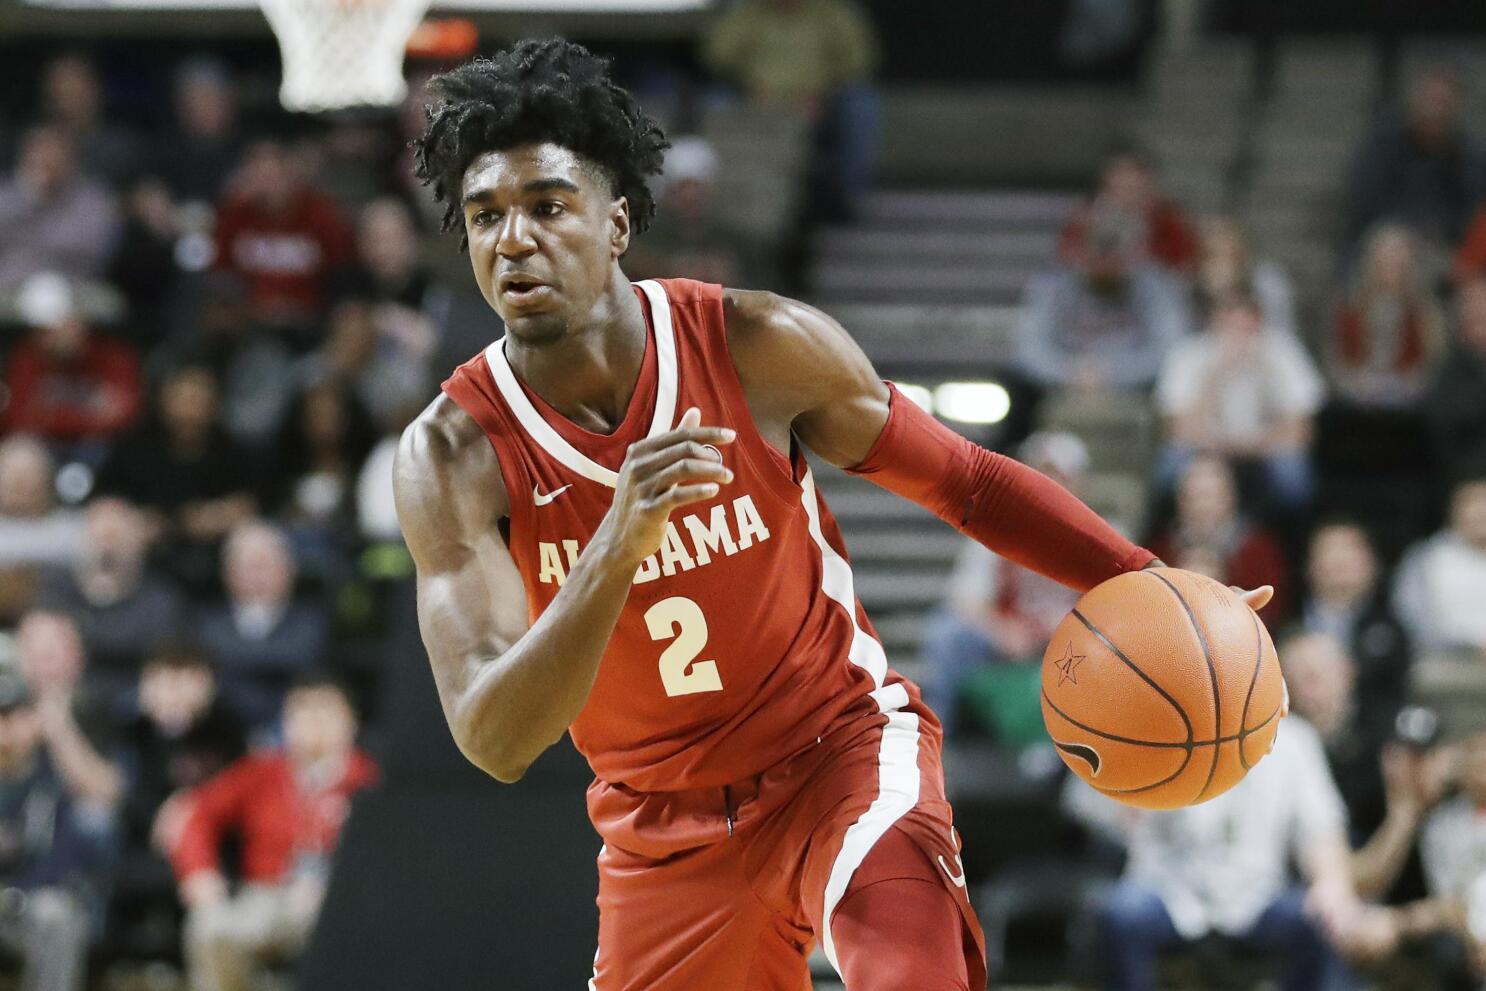 Kira Lewis Jr.: 3 things to know about the Alabama basketball star